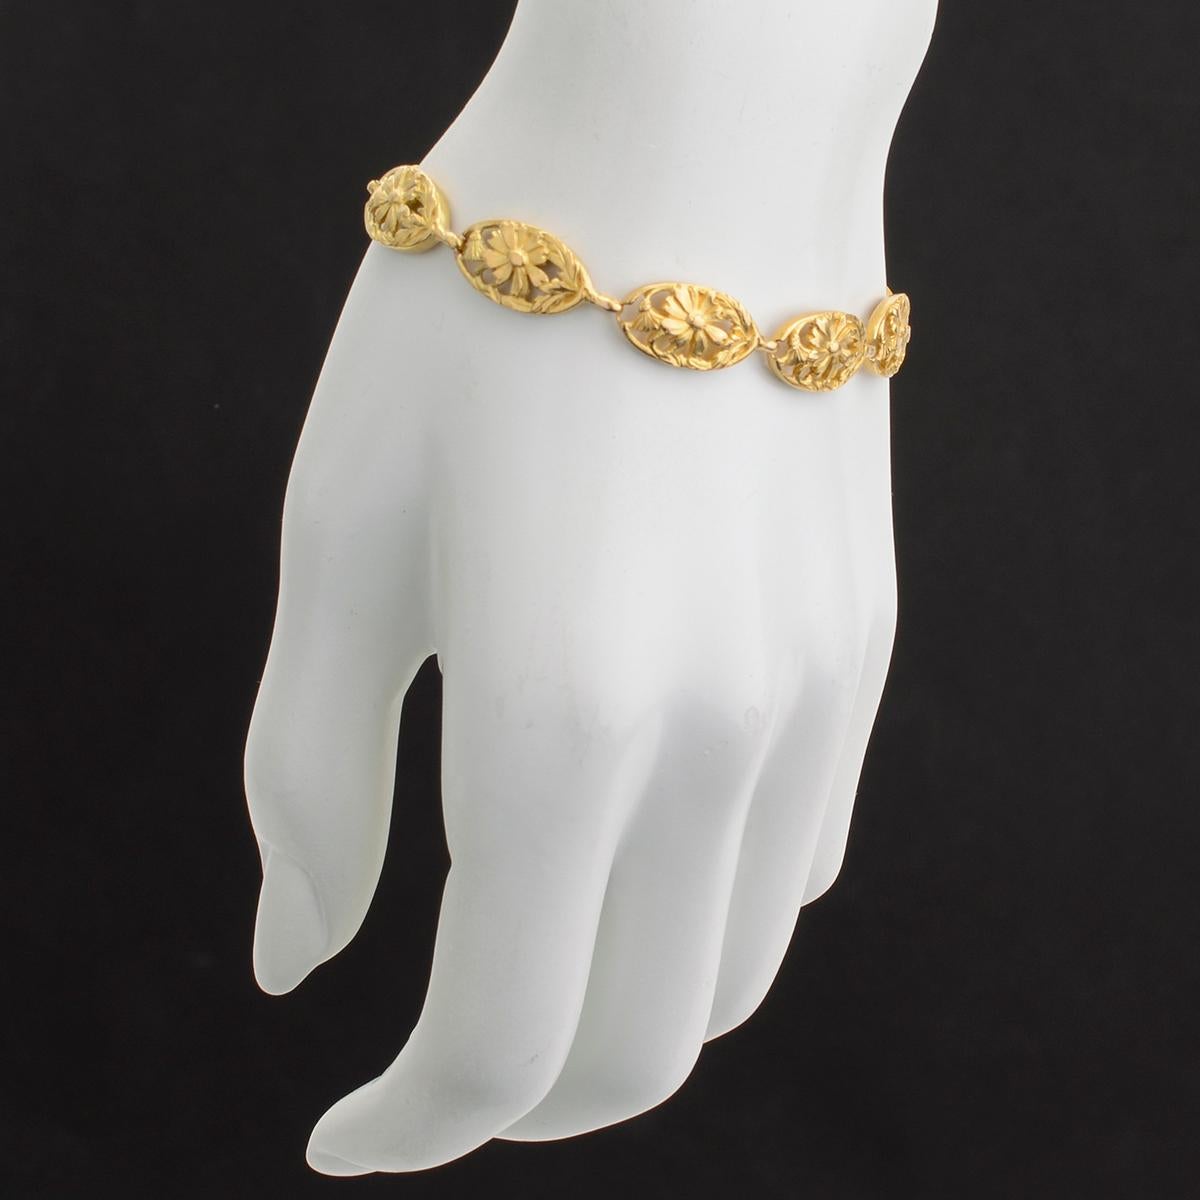 Oval-shaped link bracelet, with openwork floral motifs, in 18k yellow gold. Gold cable link safety chain. 7.5